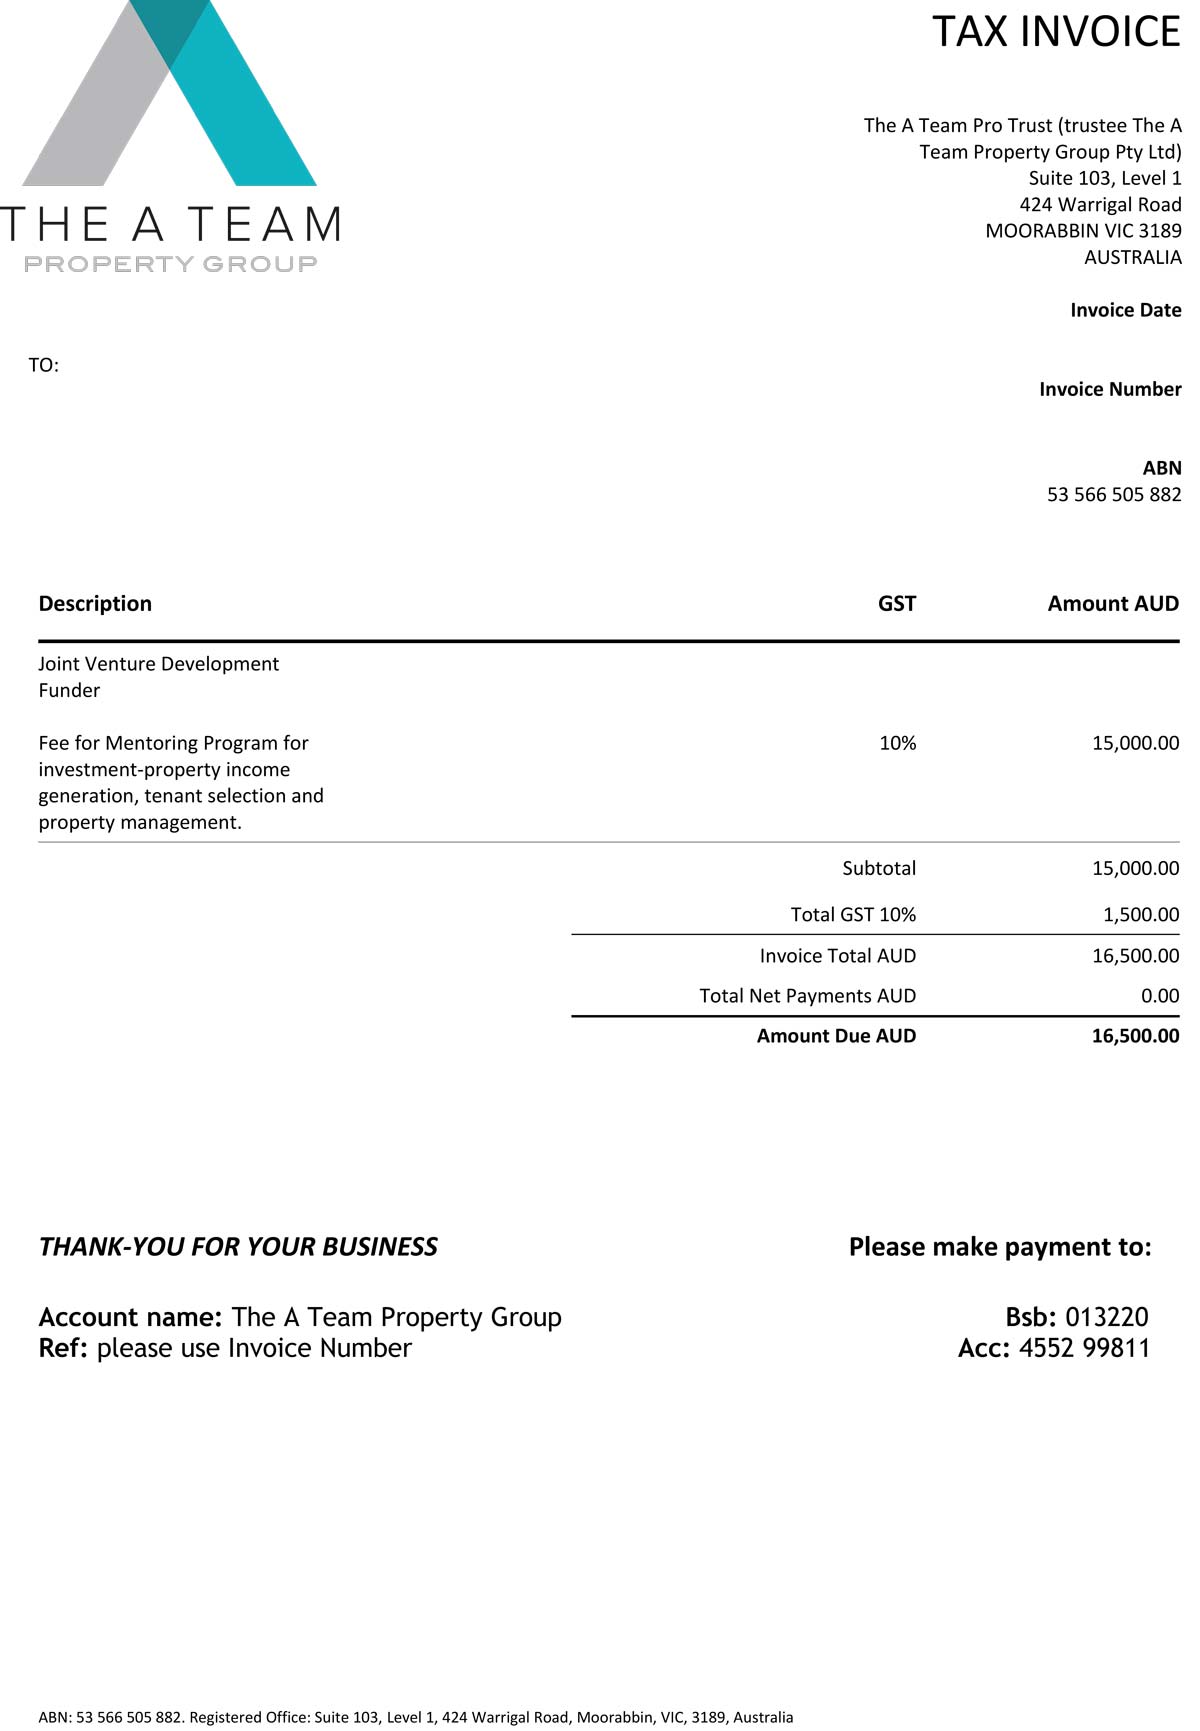 The First Invoice from The A Team Property Group